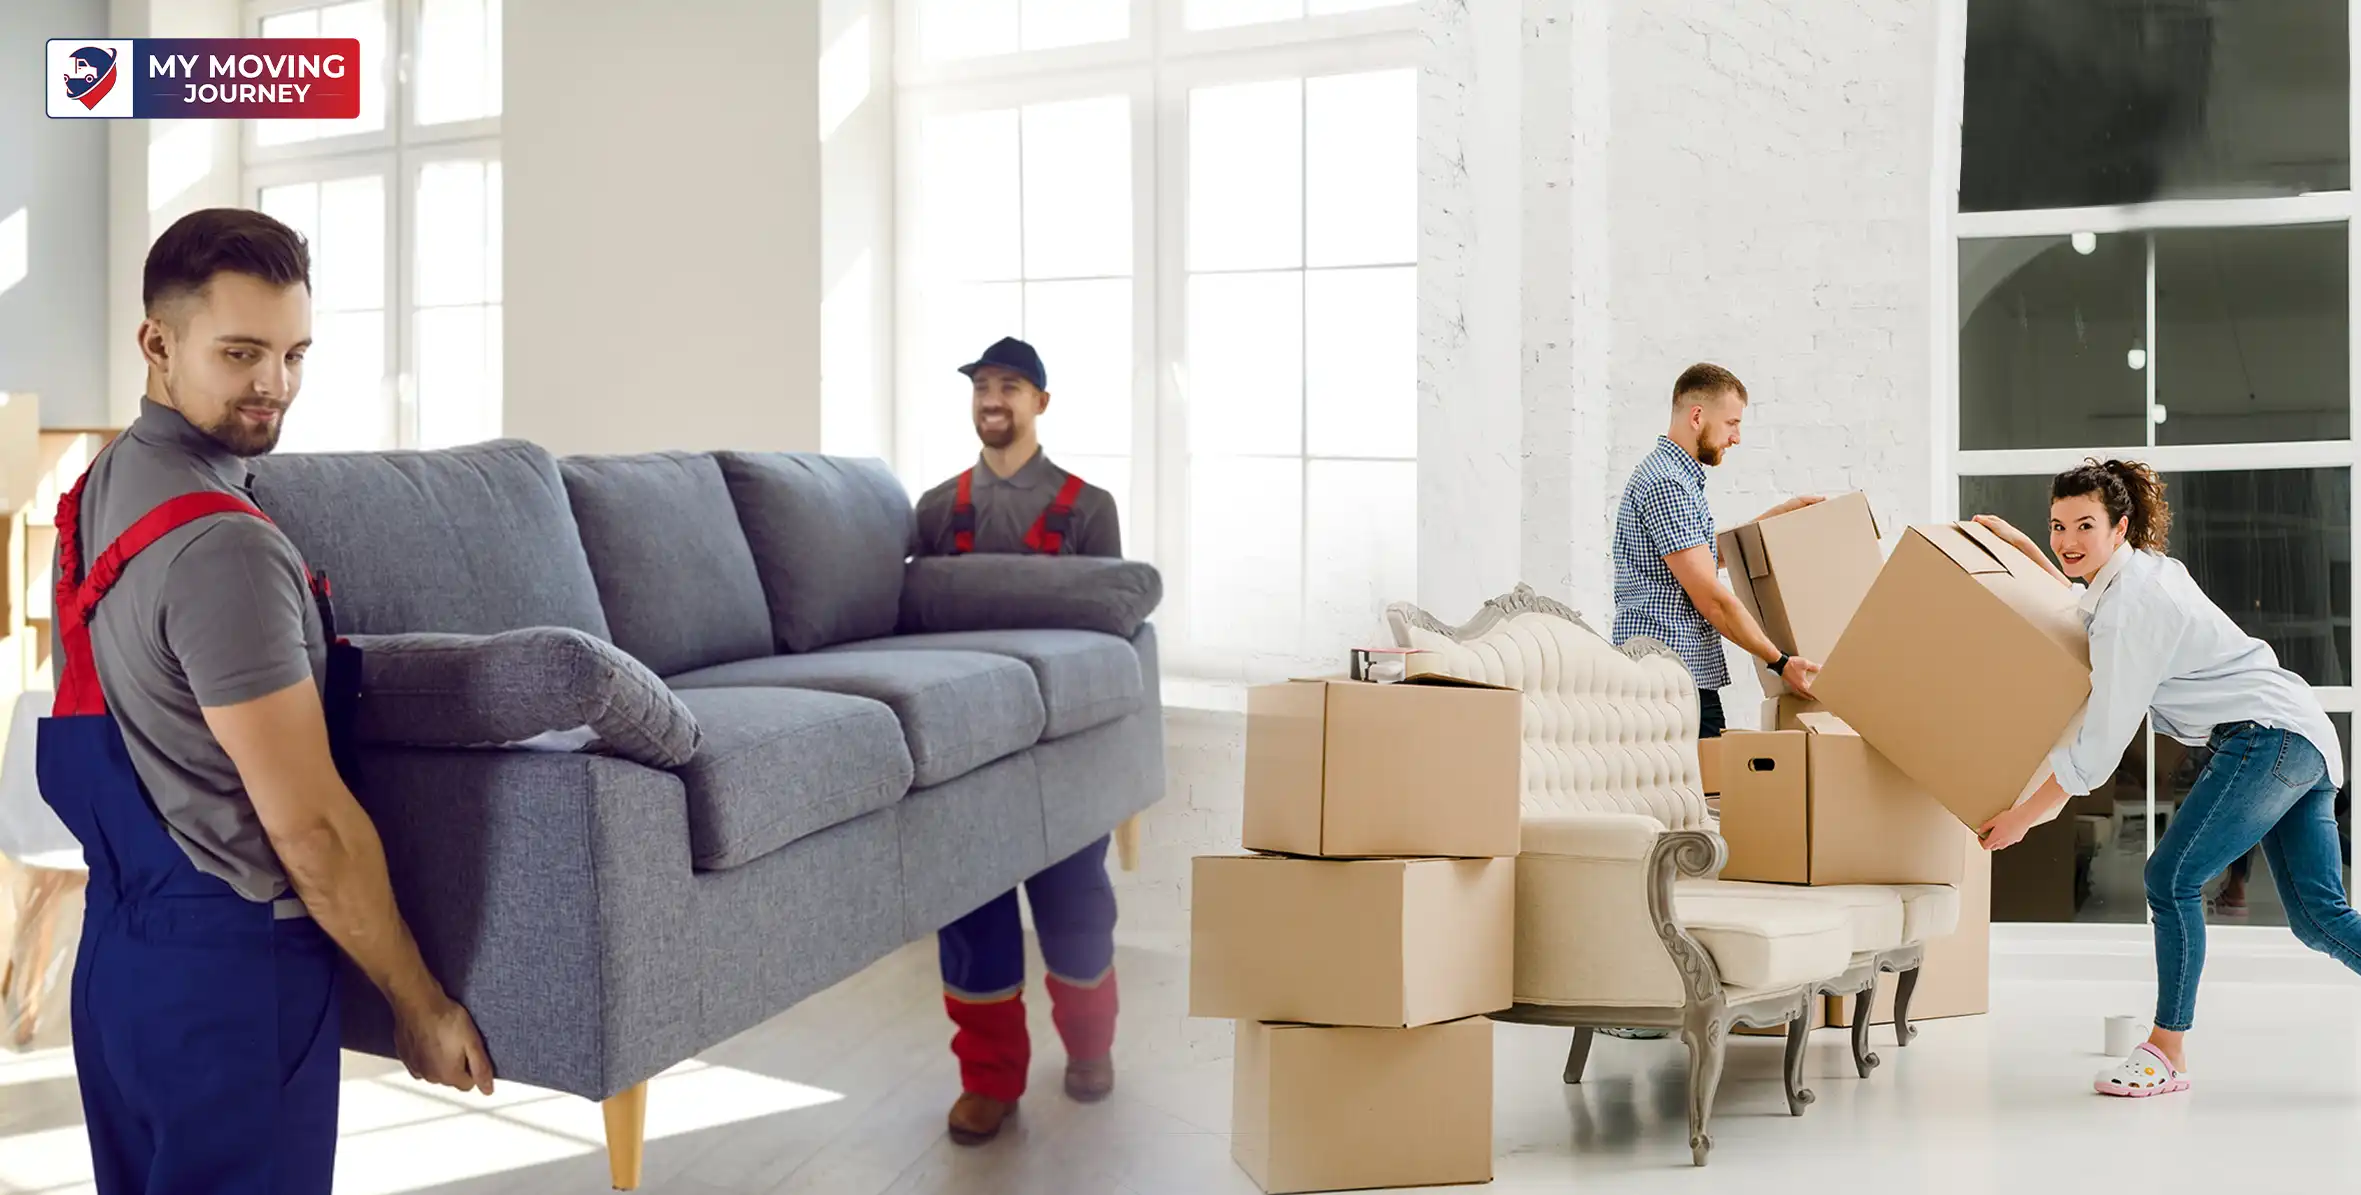 6-reliable-ways-to-hire-professionals-to-move-furniture.webp